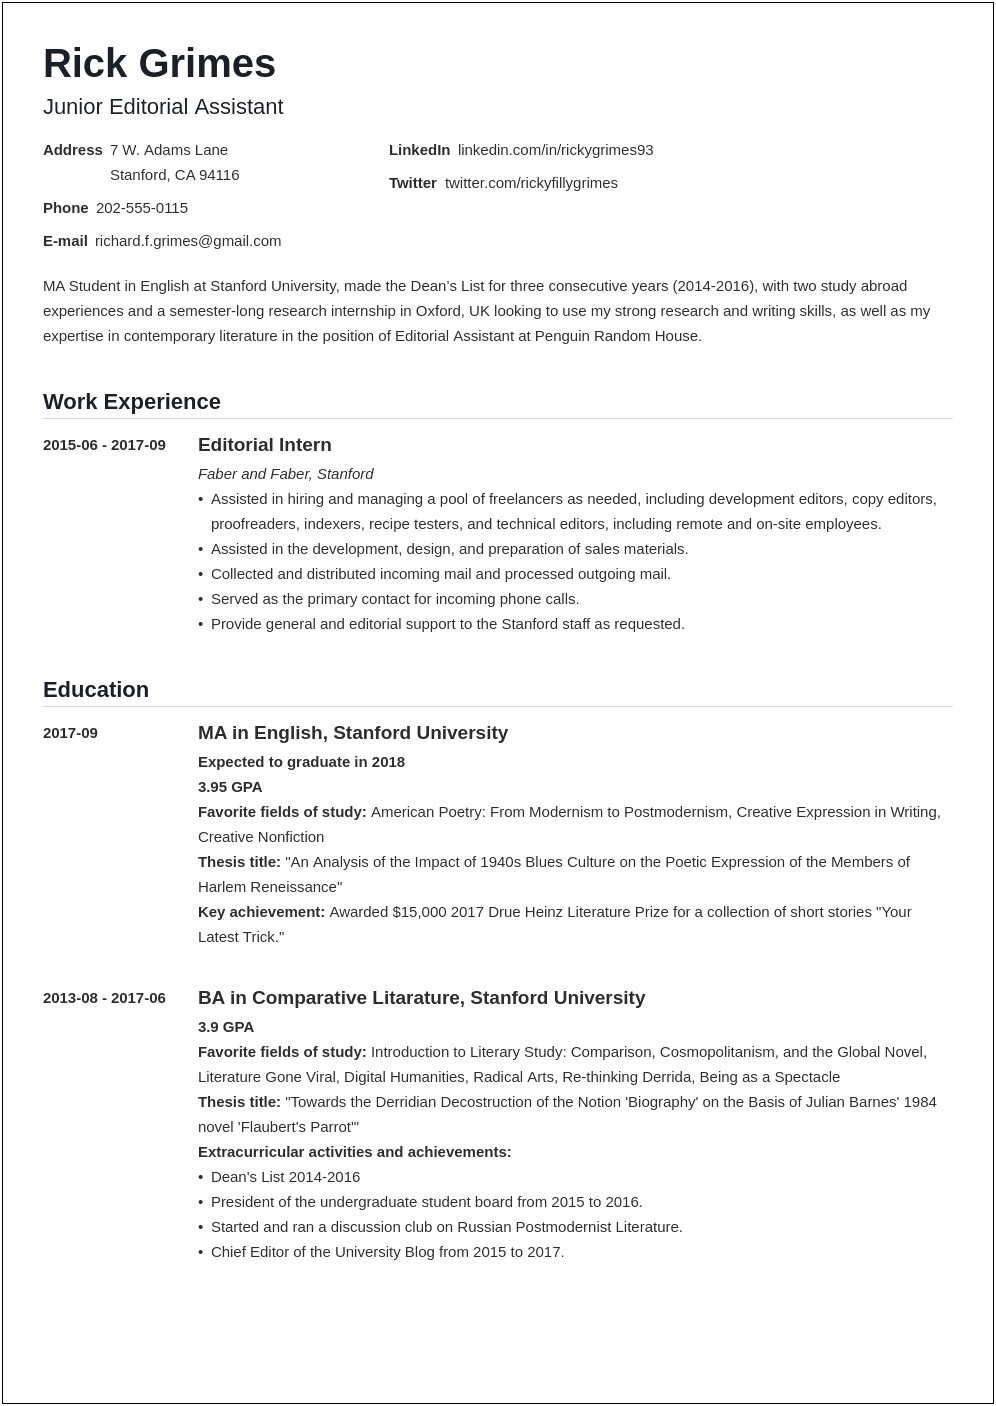 Resume Templates With No College Degree